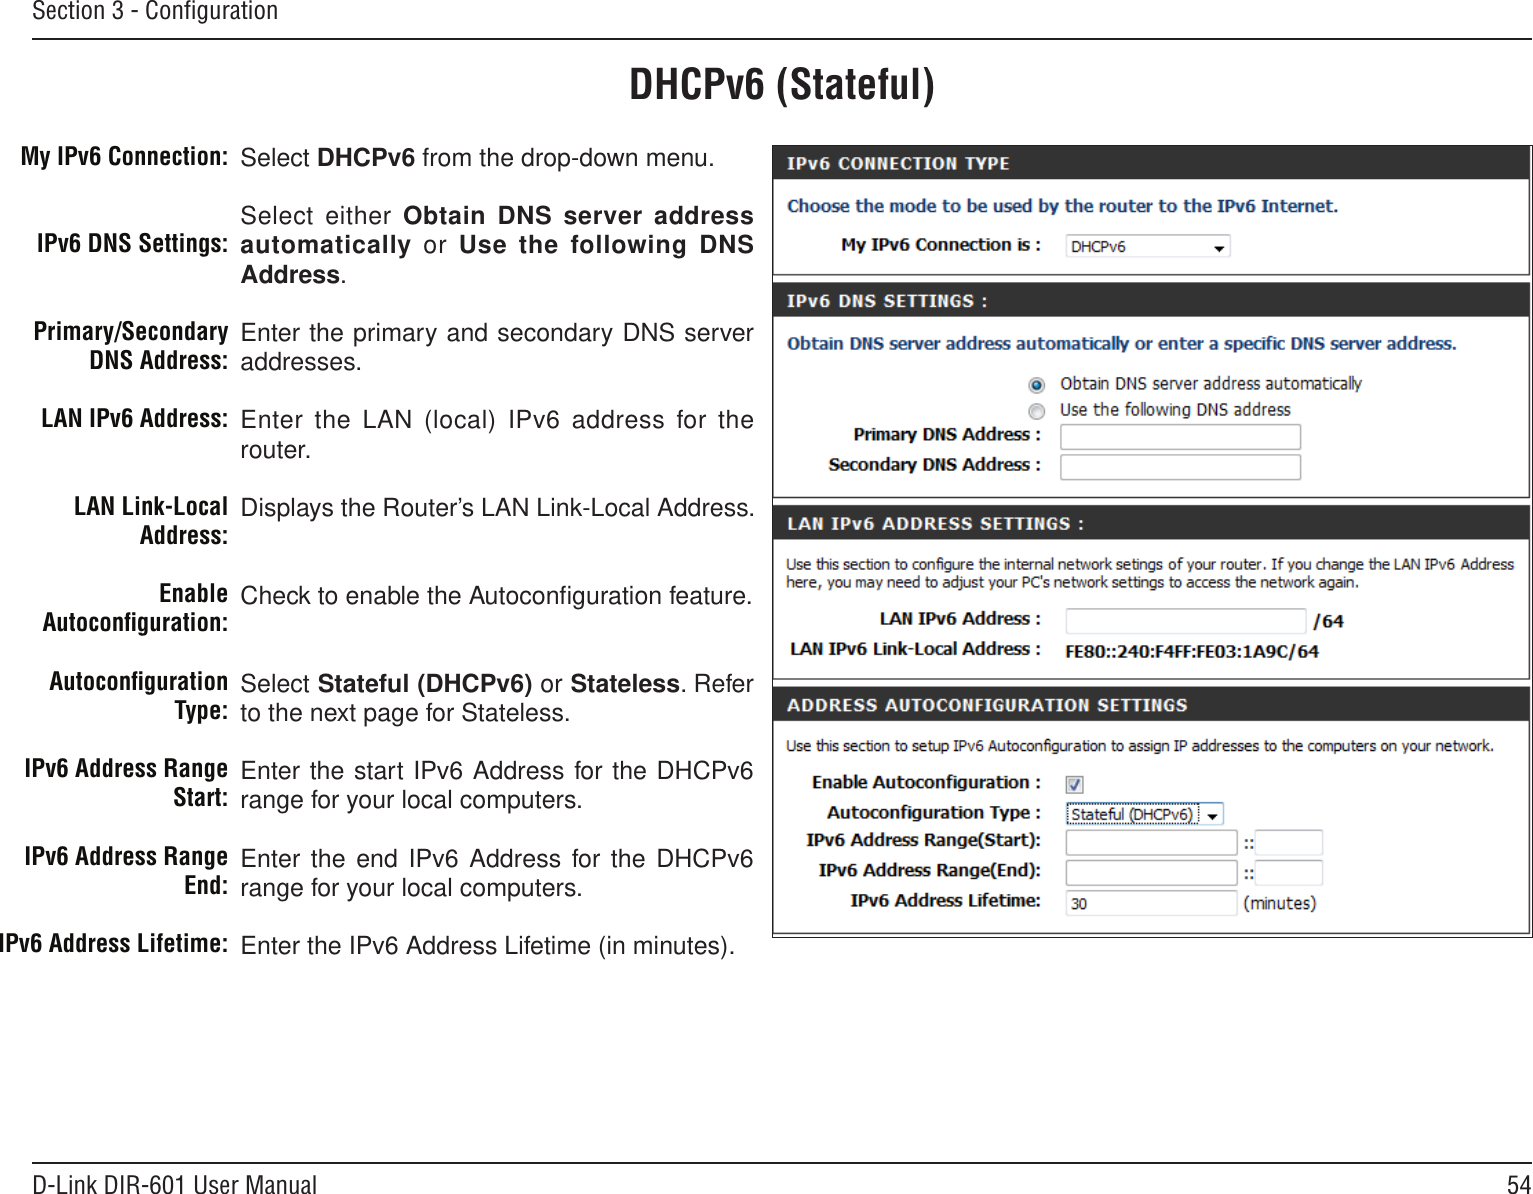 54D-Link DIR-601 User ManualSection 3 - ConﬁgurationDHCPv6 (Stateful)Select DHCPv6 from the drop-down menu.Select either Obtain DNS server address automatically  or  Use the following DNS Address.Enter the primary and secondary DNS server addresses. Enter the LAN (local) IPv6 address  for the router. Displays the Router’s LAN Link-Local Address.Check to enable the Autoconﬁguration feature.Select Stateful (DHCPv6) or Stateless. Refer to the next page for Stateless.Enter the start IPv6 Address for the DHCPv6 range for your local computers.Enter the end IPv6 Address  for the DHCPv6 range for your local computers.Enter the IPv6 Address Lifetime (in minutes).My IPv6 Connection:IPv6 DNS Settings:Primary/Secondary DNS Address:LAN IPv6 Address:LAN Link-Local Address:Enable Autoconﬁguration:Autoconﬁguration Type:IPv6 Address Range Start:IPv6 Address Range End:IPv6 Address Lifetime: